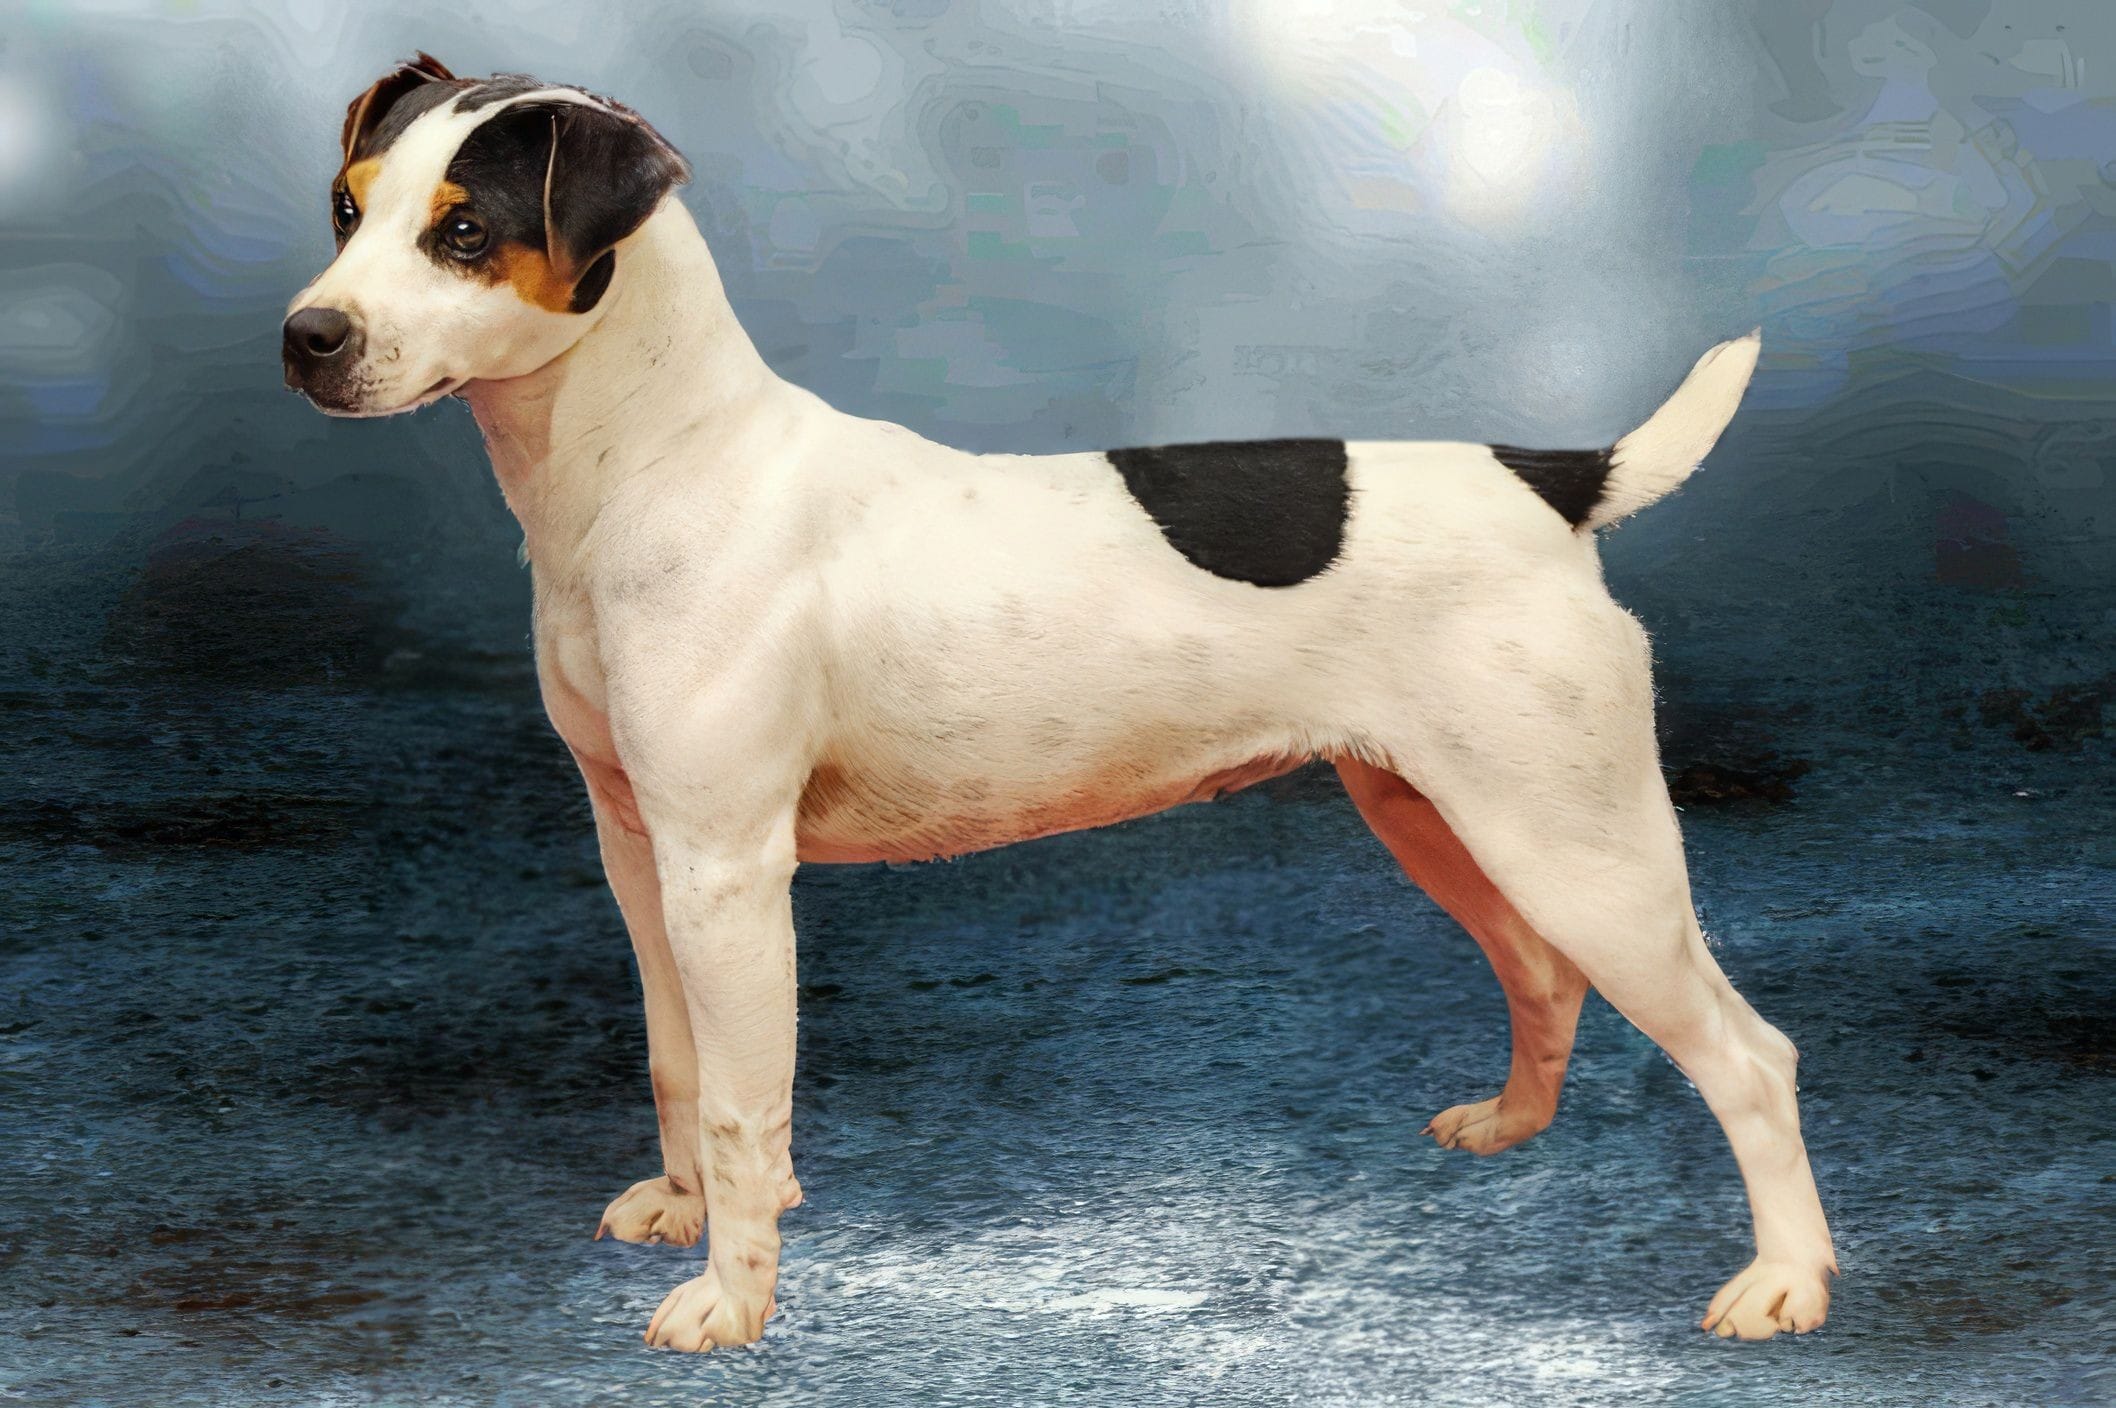 Parson Russell Terrier "Scorn" at Cher Car Kennels